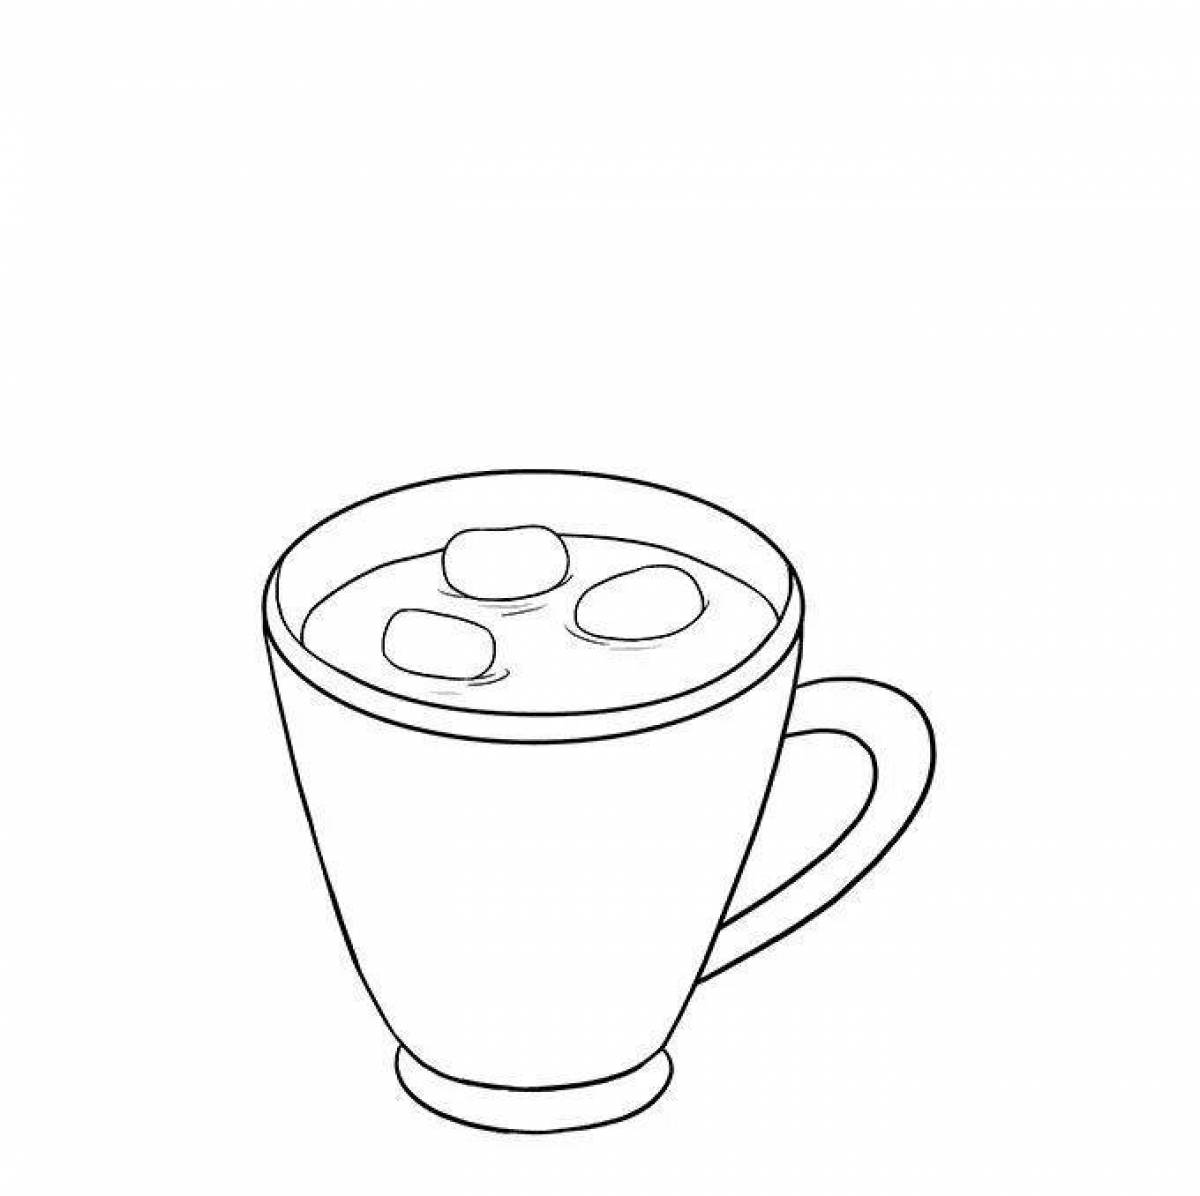 Jovial cocoa coloring page